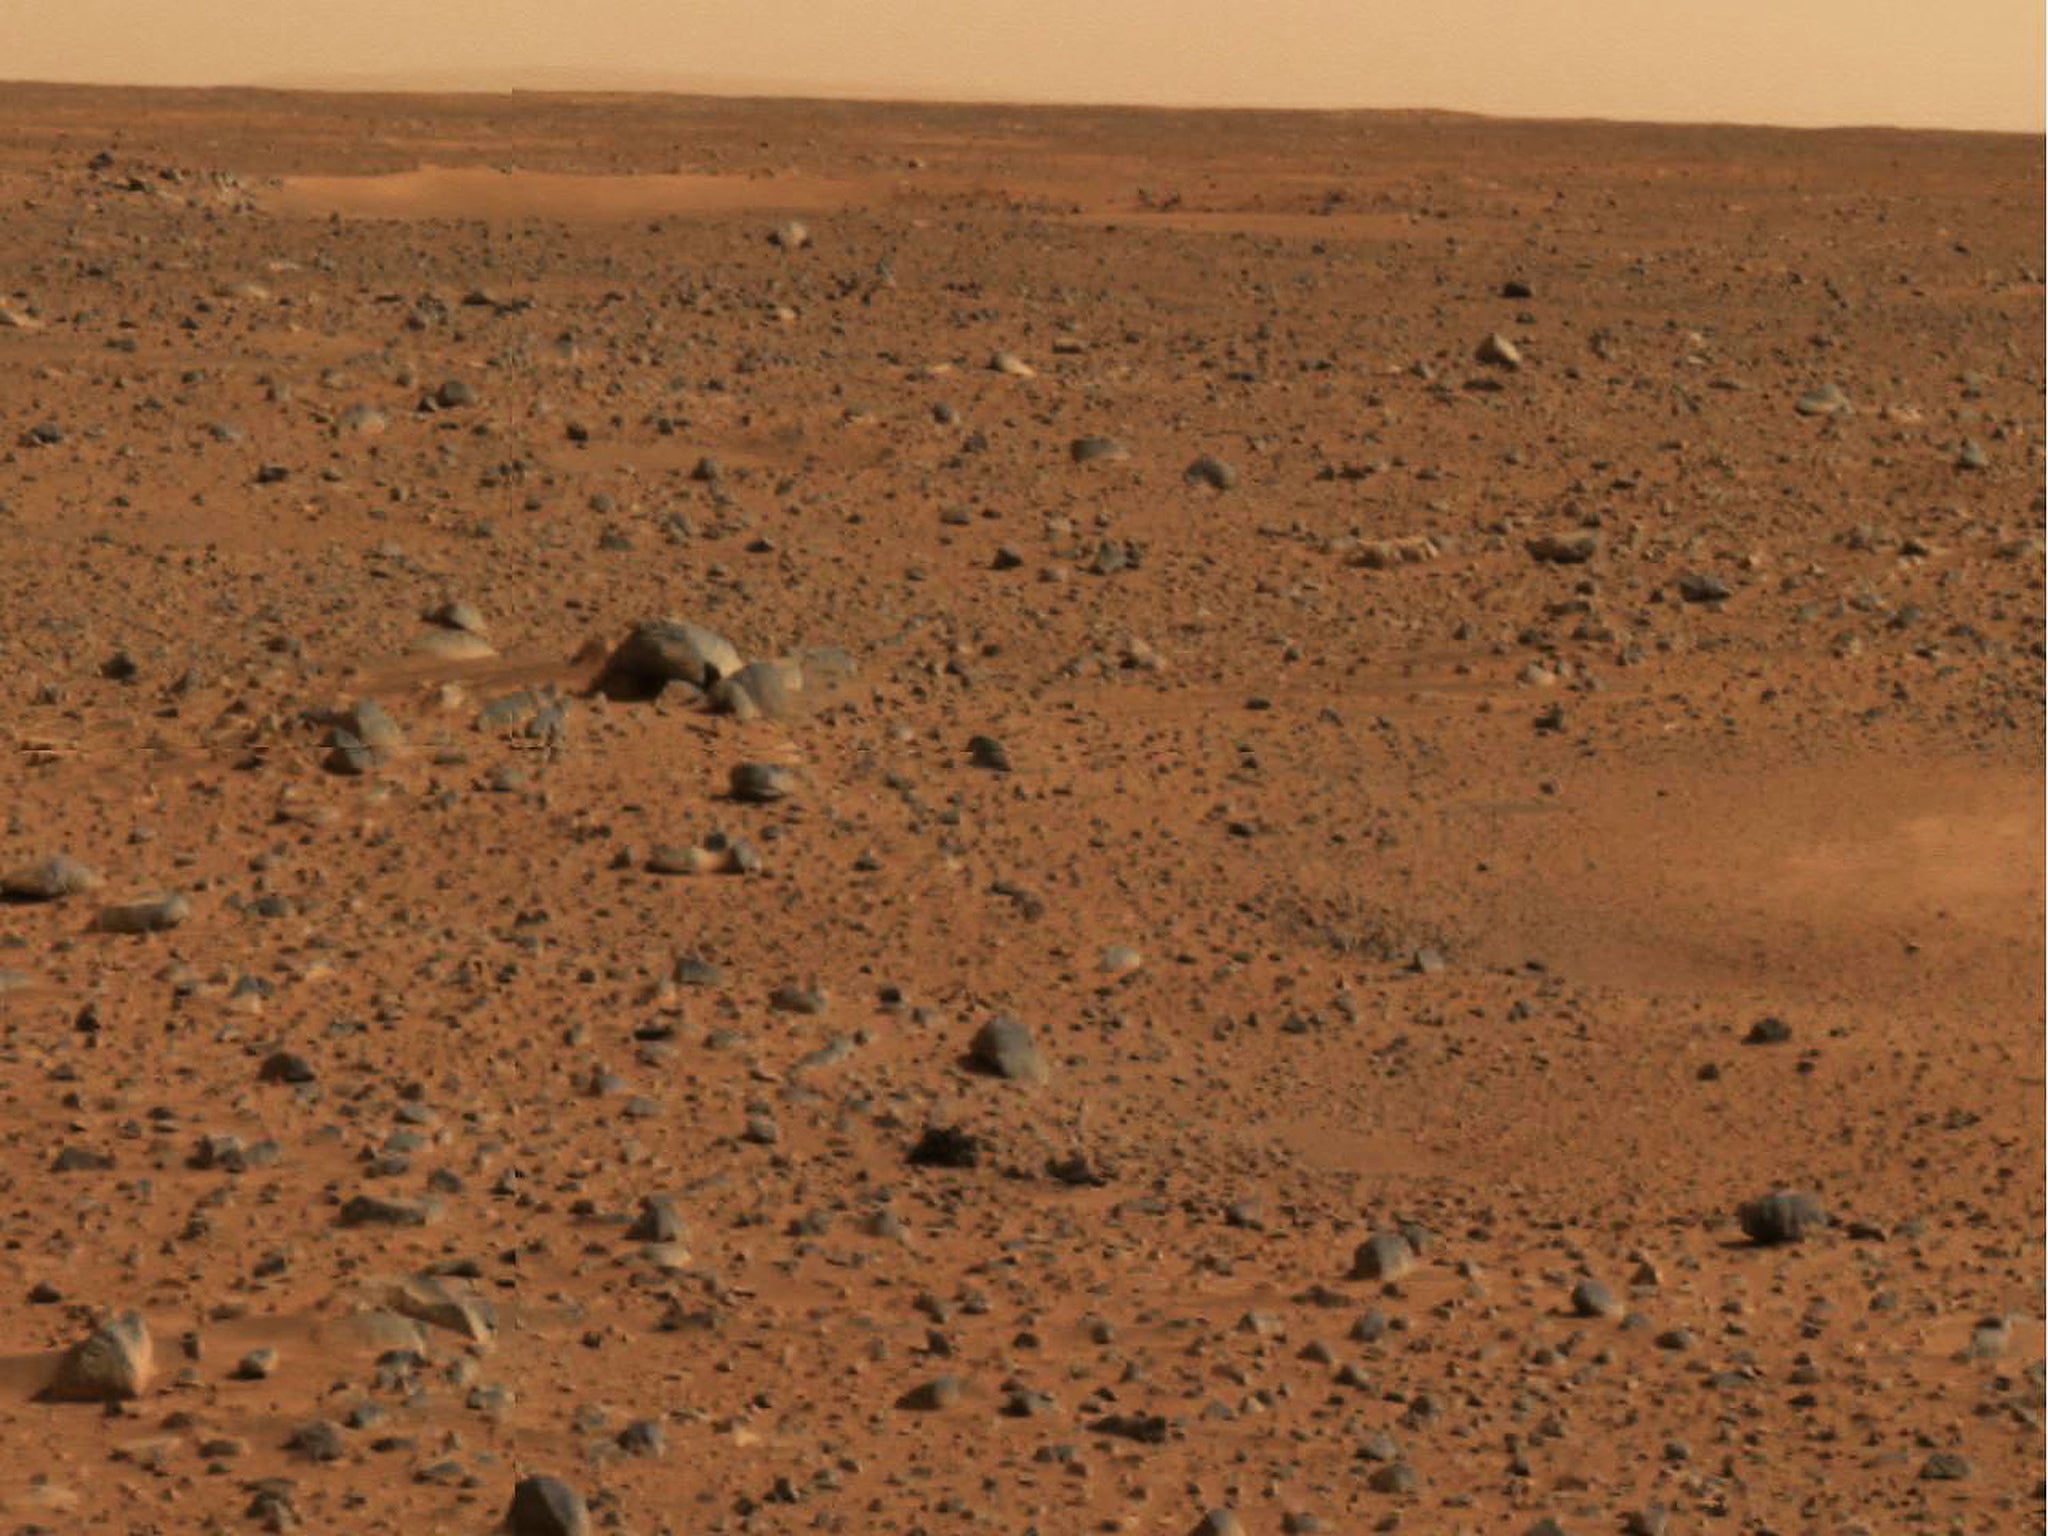 Scientists have detected the presence of a chemical substance in the Martian soil